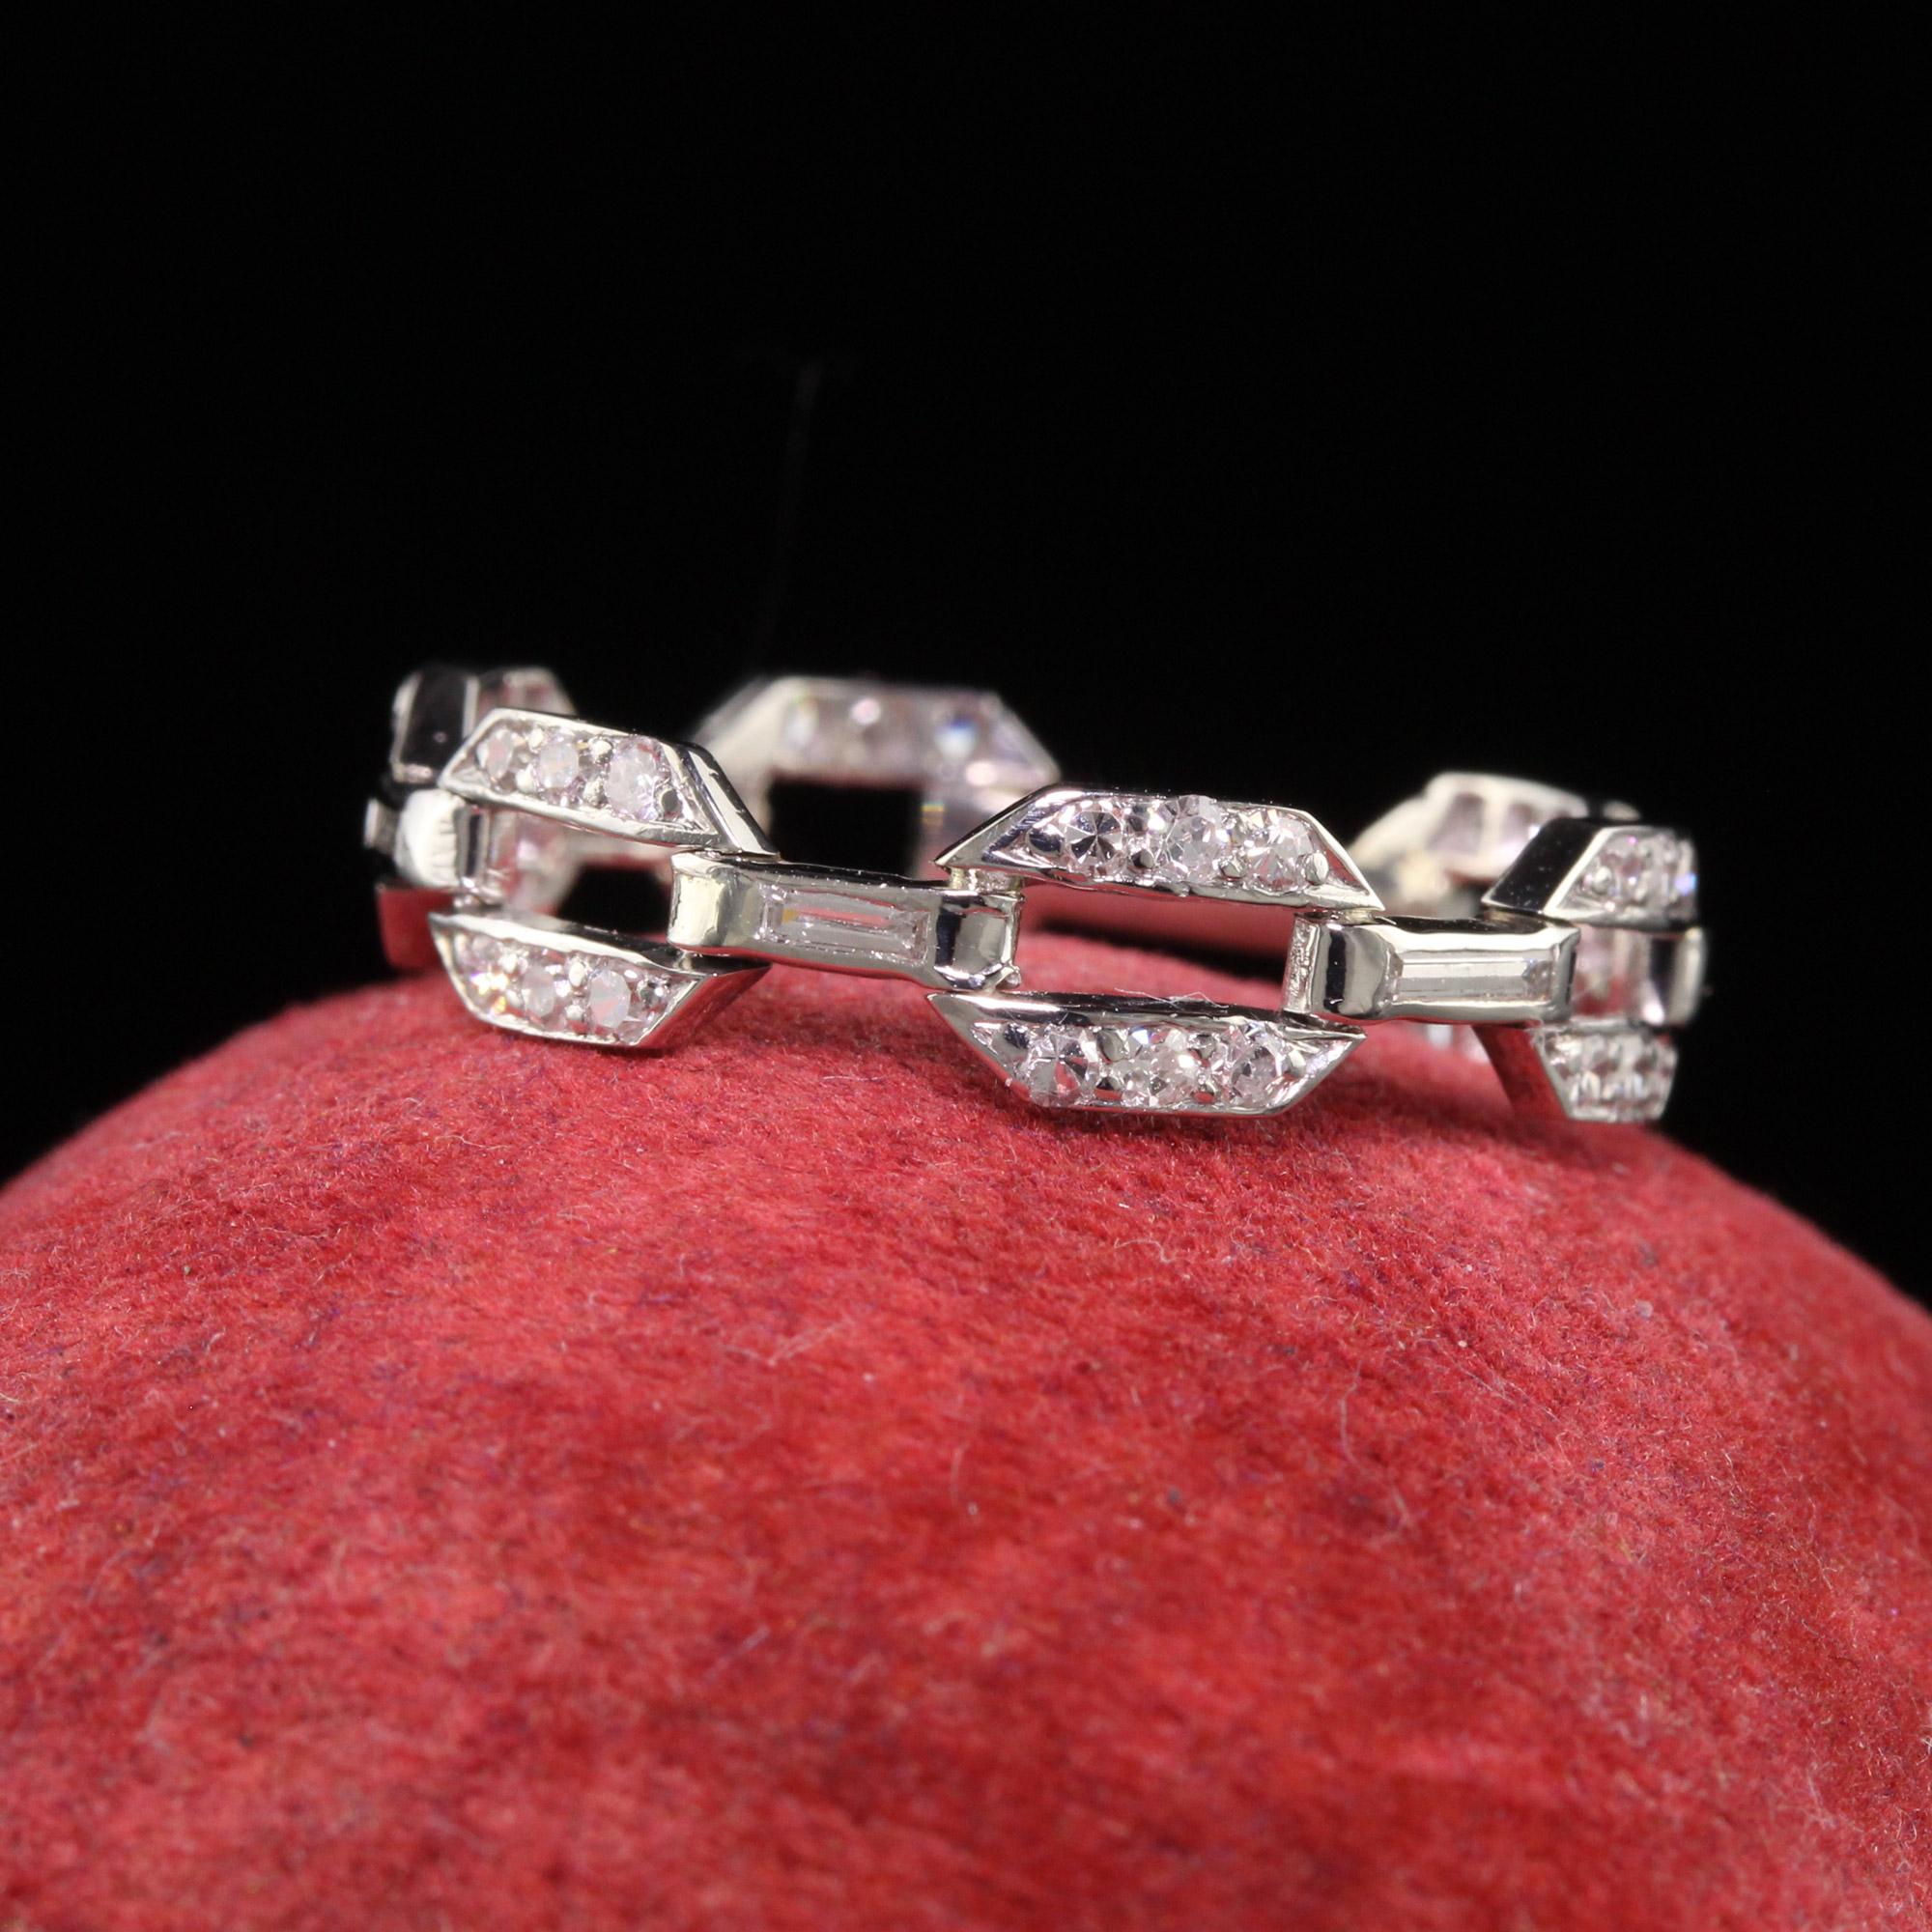 Beautiful Antique Art Deco Platinum Diamond Single Cut Diamond Buckle Link Wedding Band. This gorgeous wedding band is crafted in platinum. The ring has single cut diamonds and baguette diamonds going around the ring. There is a section of the ring